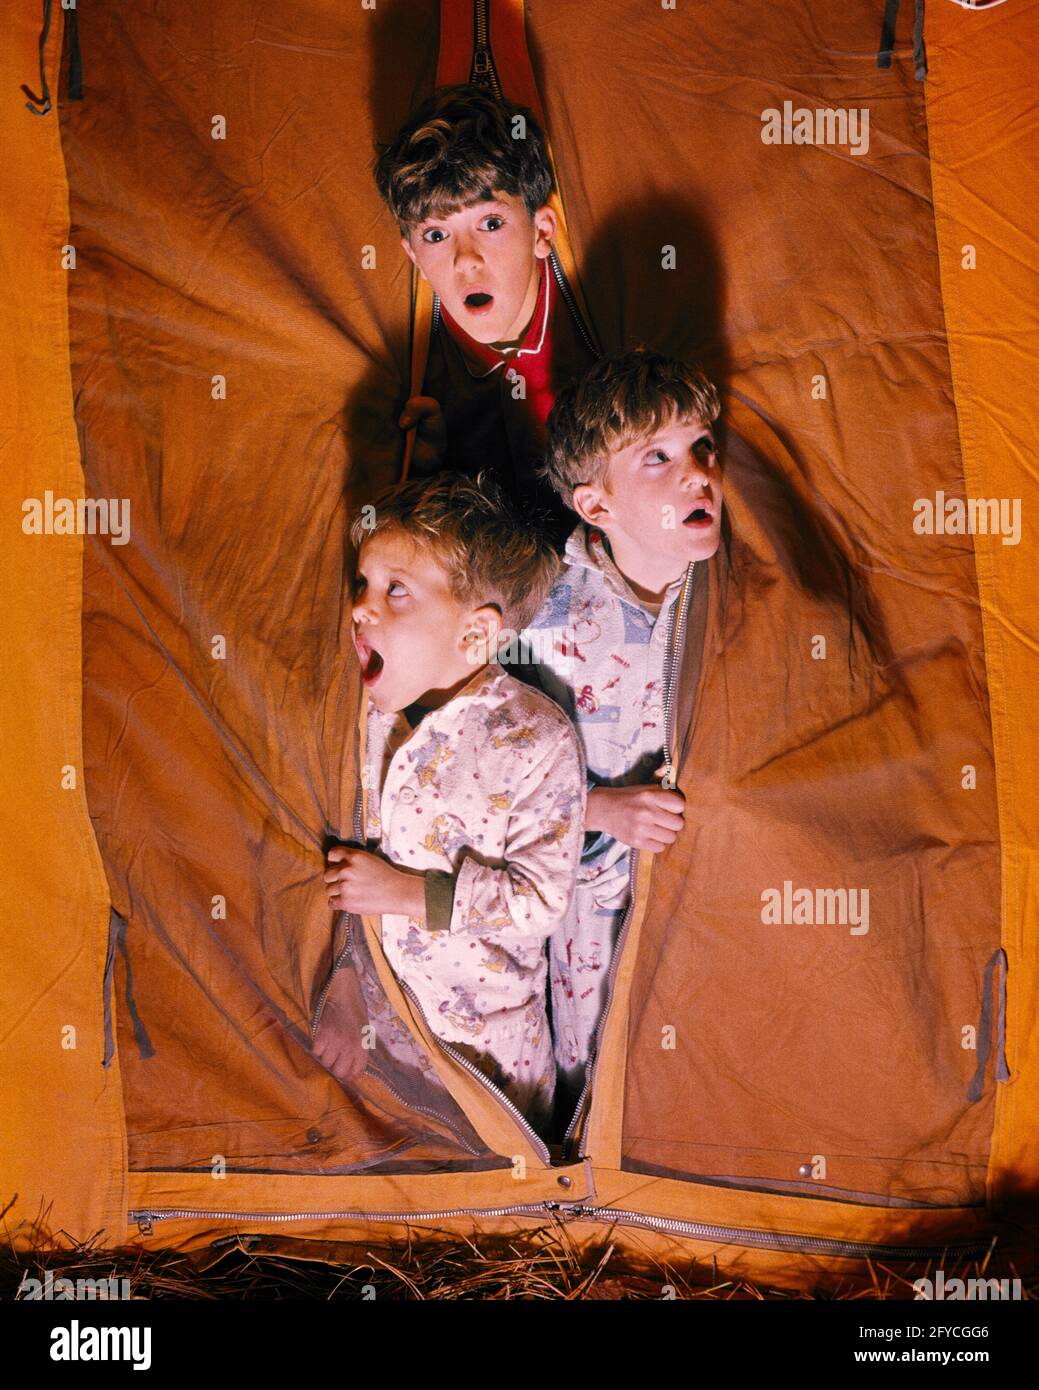 1960s CAMPING ADVENTURE THREE SCARED FRIGHTENED BOYS BROTHERS LOOKING OUT OF TENT FLAP OPENING AT NIGHT ONE LOOKING AT CAMERA  - kc3906 CRS001 HARS LIFESTYLE BROTHERS RURAL HEALTHINESS COPY SPACE FRIENDSHIP HALF-LENGTH MALES FRIGHTENED SIBLINGS WIDE EYE CONTACT BUG-EYED HEAD AND SHOULDERS ADVENTURE EXCITEMENT RECREATION AWAKE SIBLING TERRIFIED CONCEPTUAL IMAGINATION WIDE-EYED GROWTH JUVENILES STARTLED TOGETHERNESS ALARMED CAUCASIAN ETHNICITY OLD FASHIONED Stock Photo